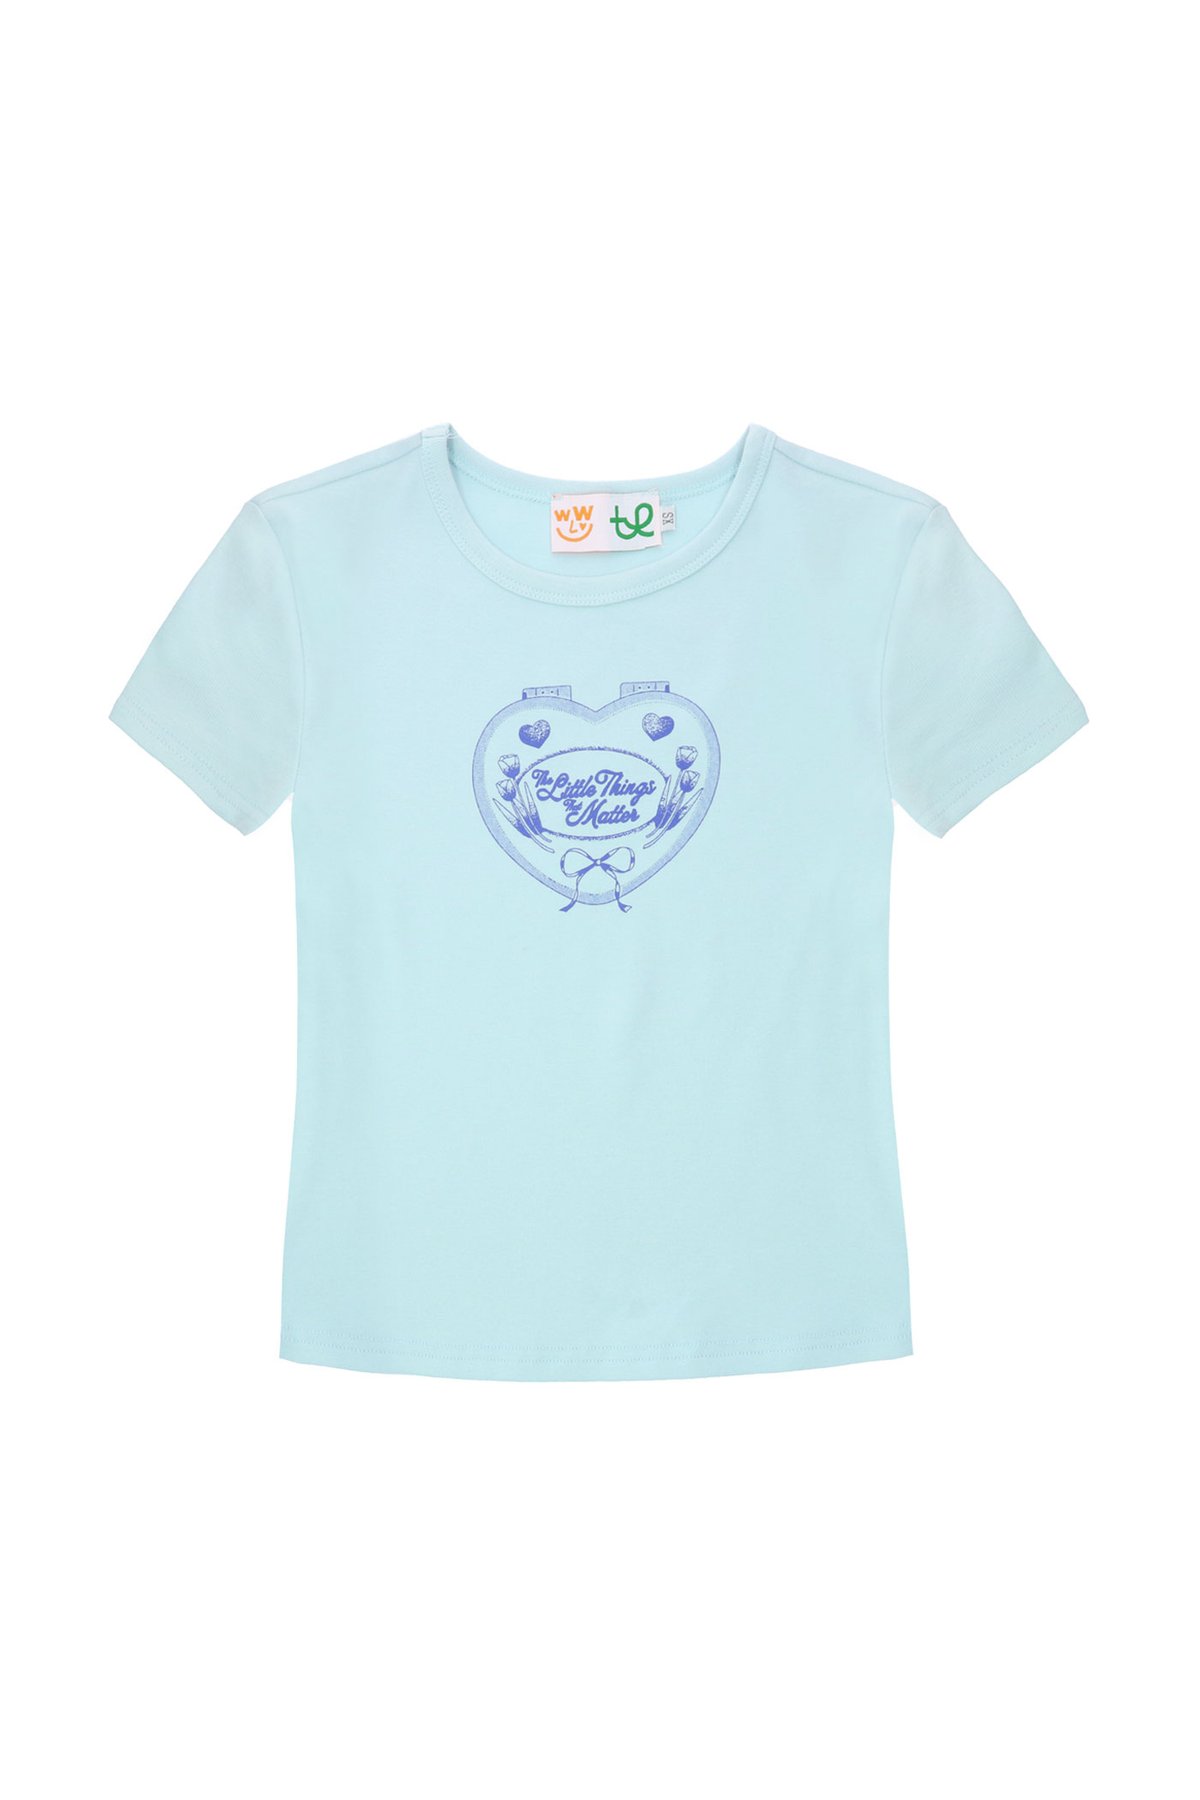 The Little Things That Matter Baby Tee (Baby Blue)